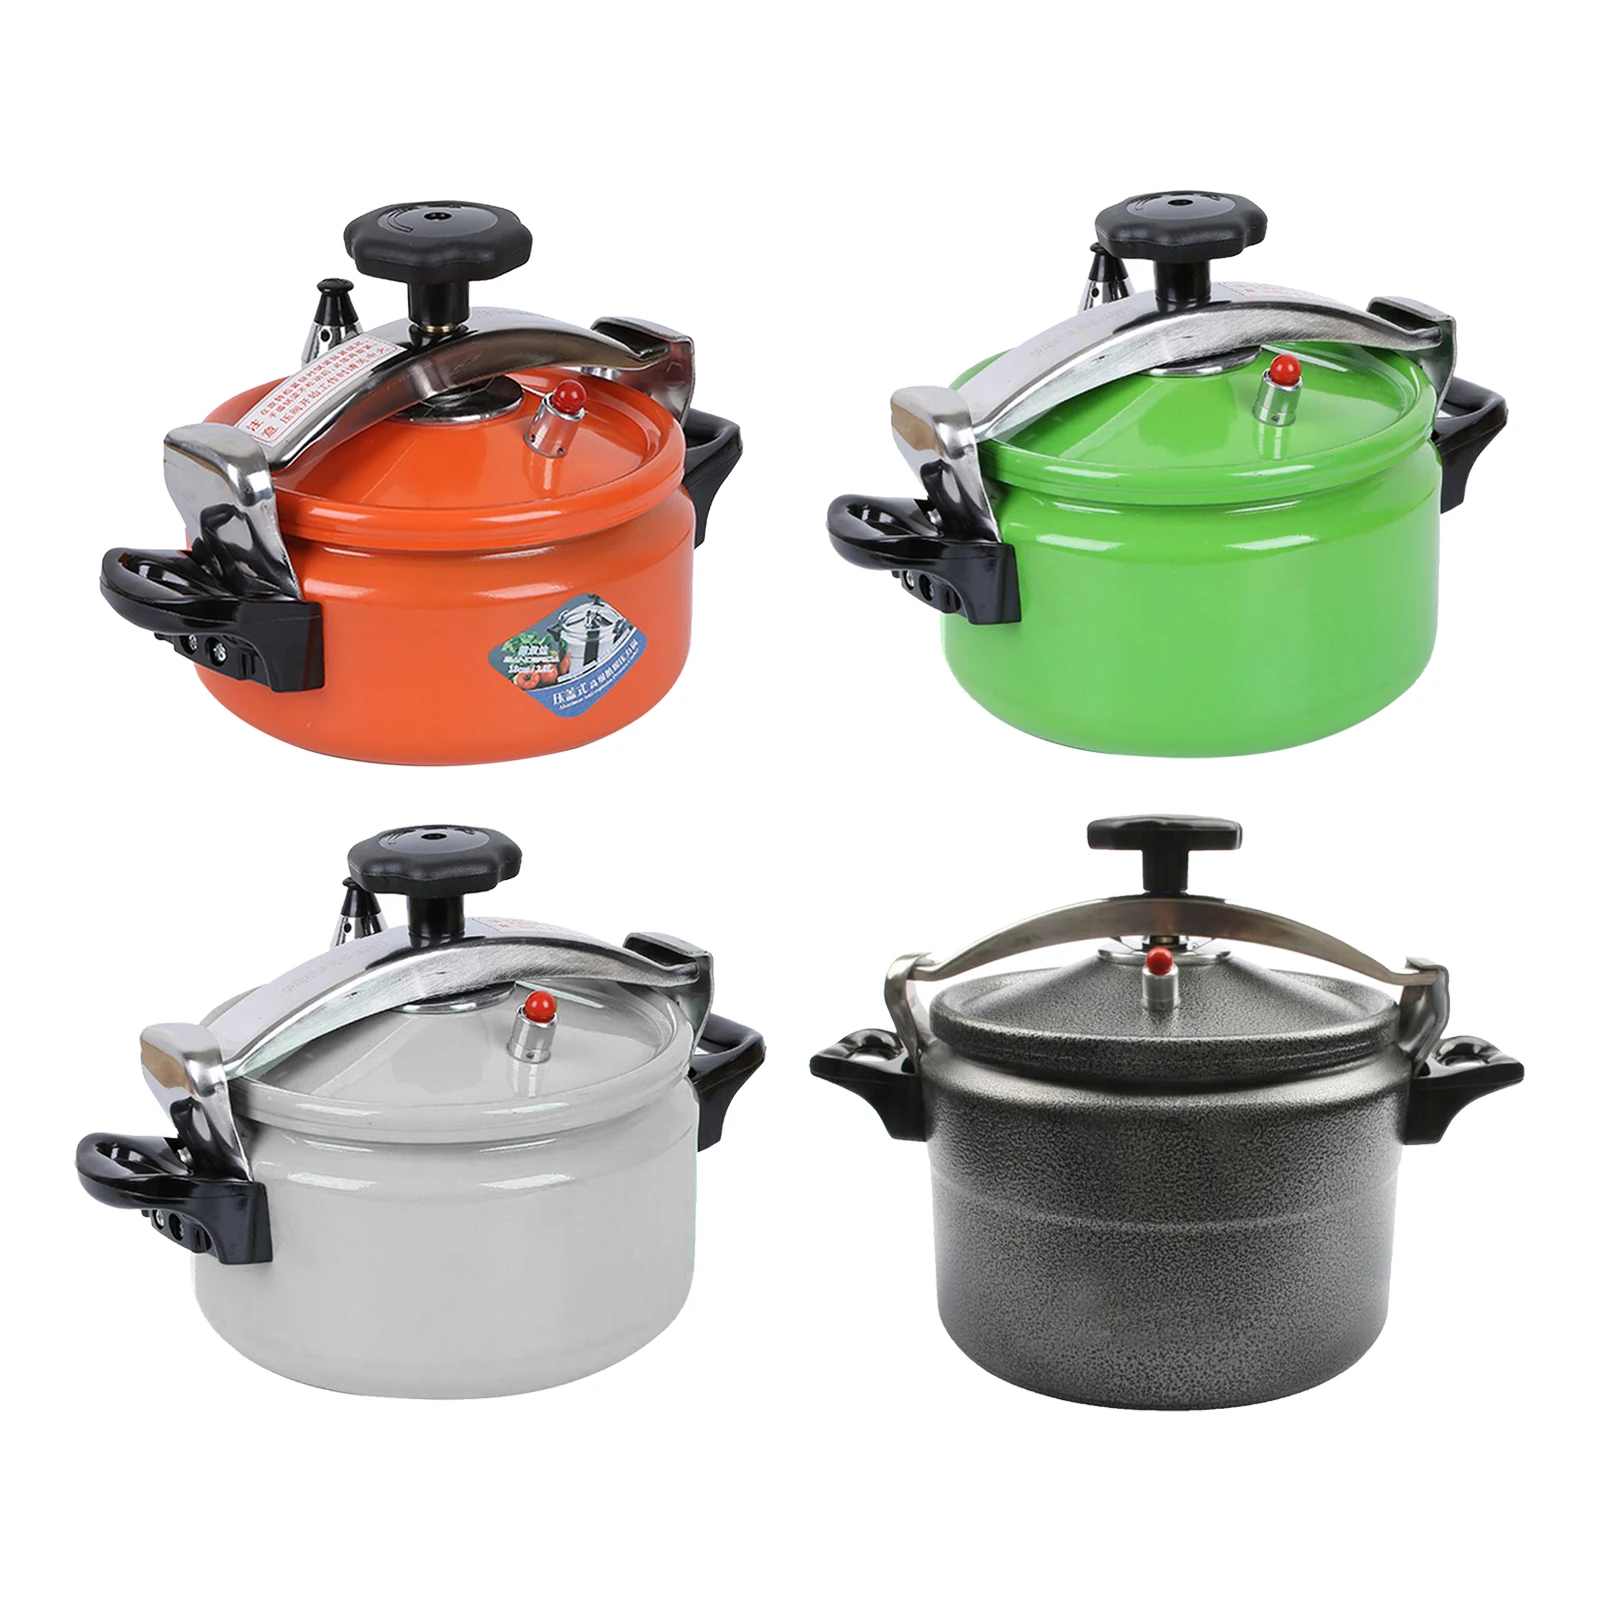 

Ceramic Camping Outdoor Cooker For Rice Stove Pressure Cooker Electric Cooking Multi-functional Slow Pot Soup Backpacking